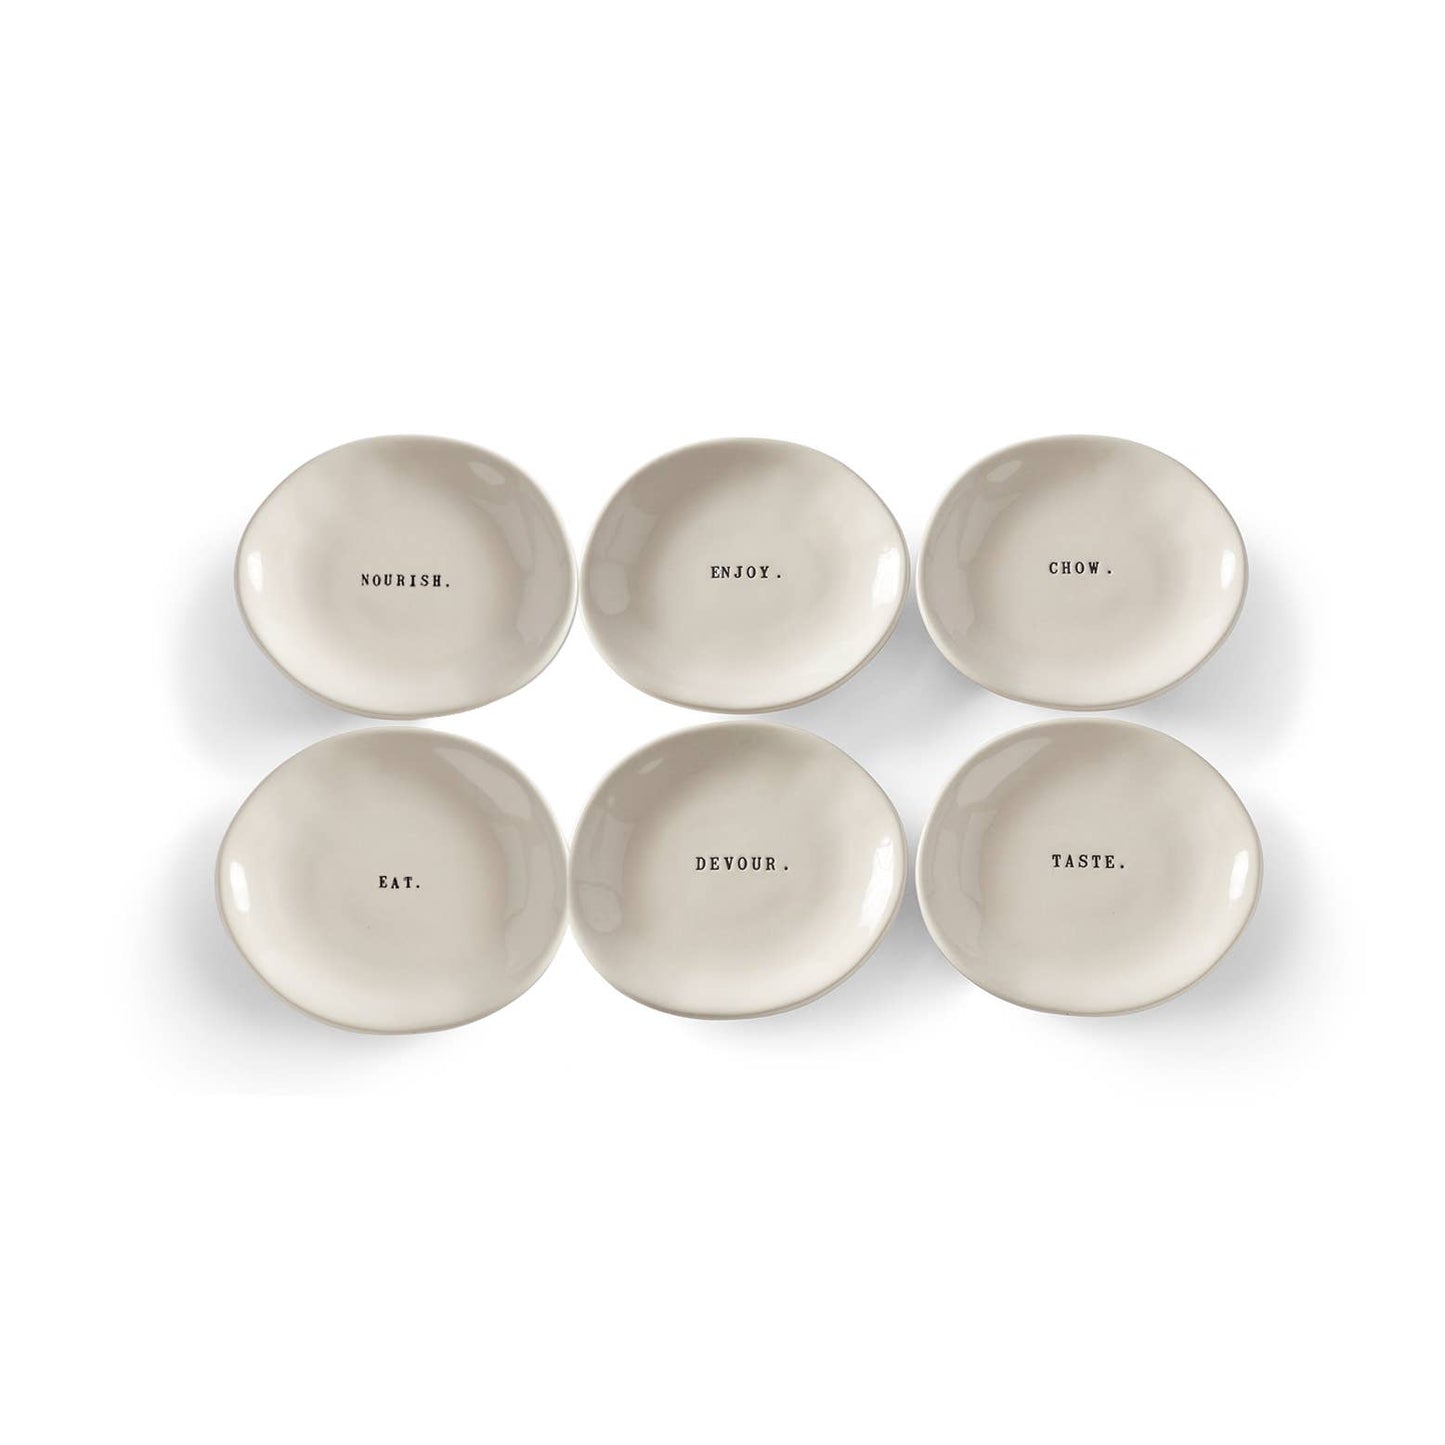 Rae Dunn Small Eating Dishes, Set of 6 (Min of 2)